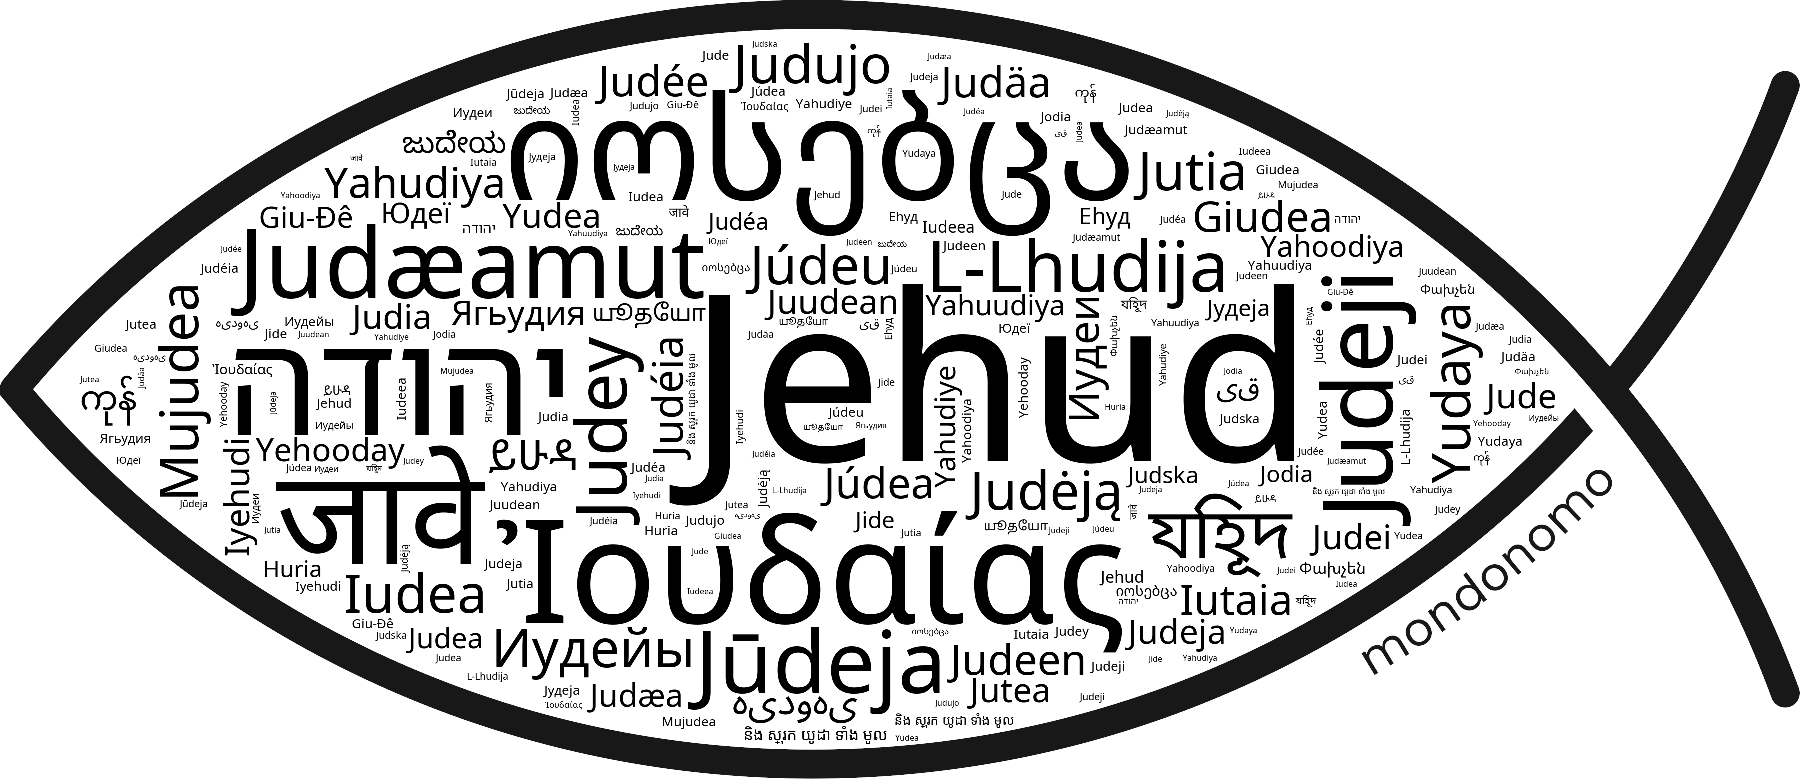 Name Jehud in the world's Bibles